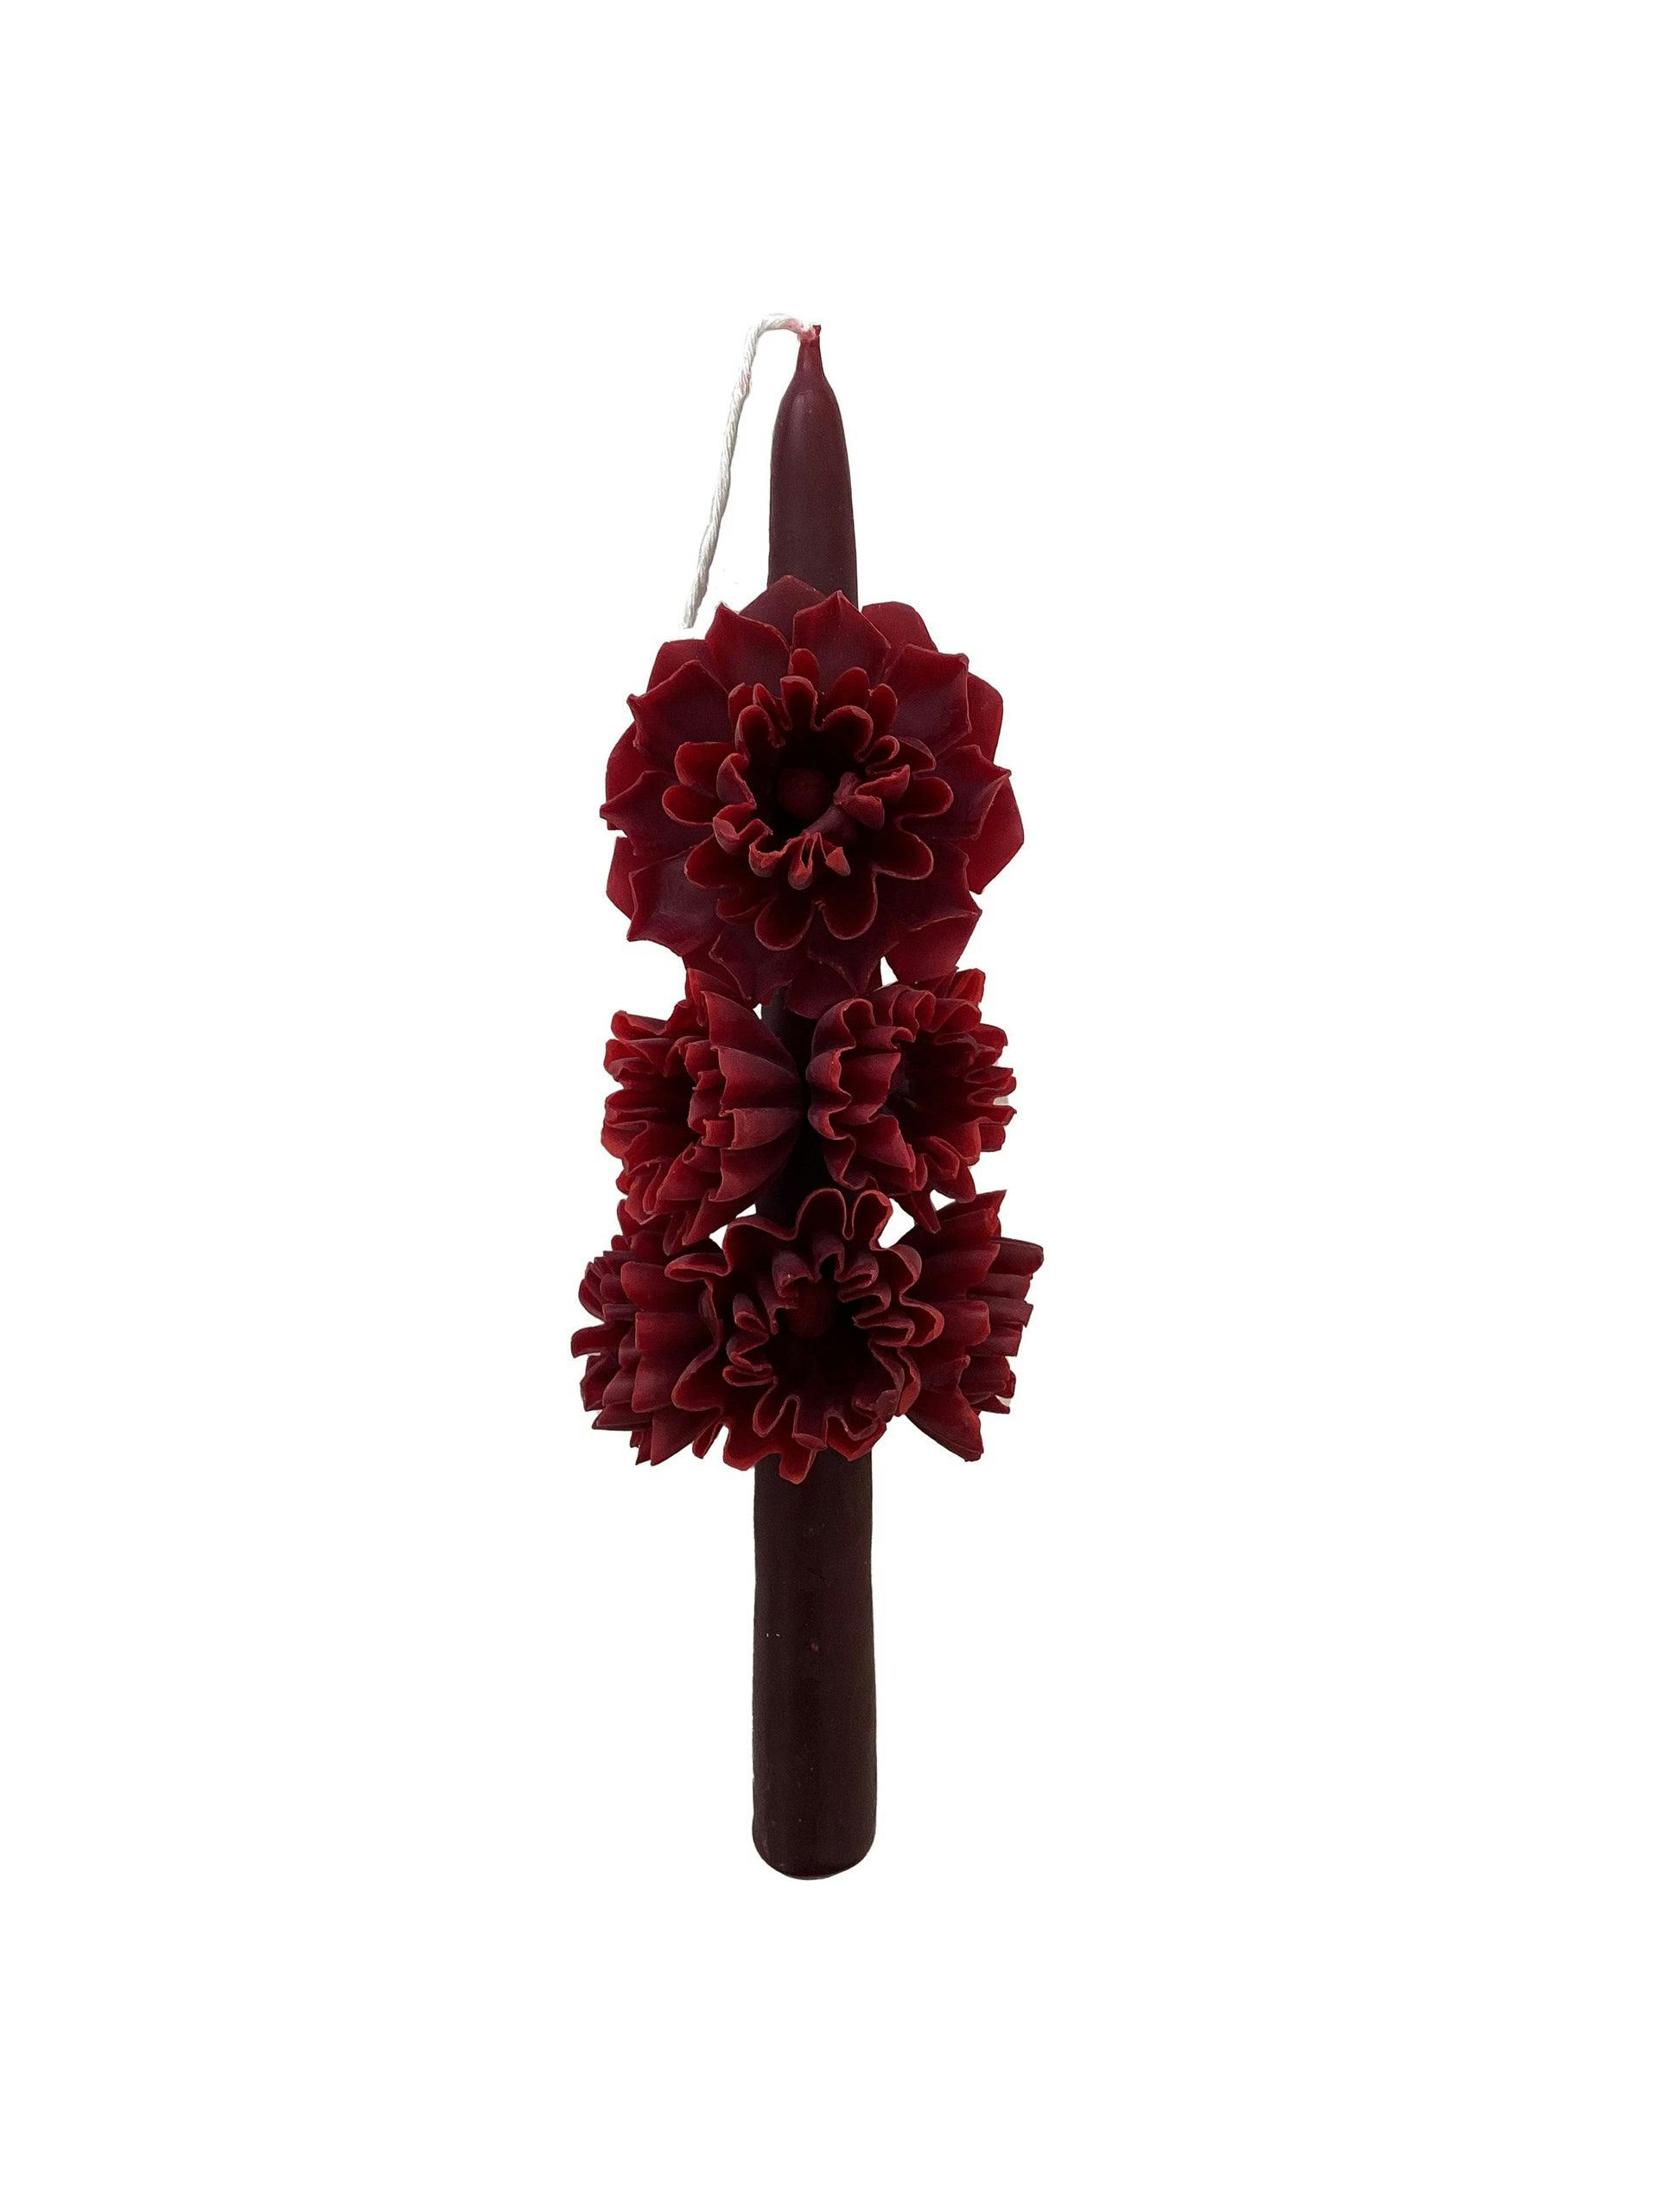 Floral candle in burgundy